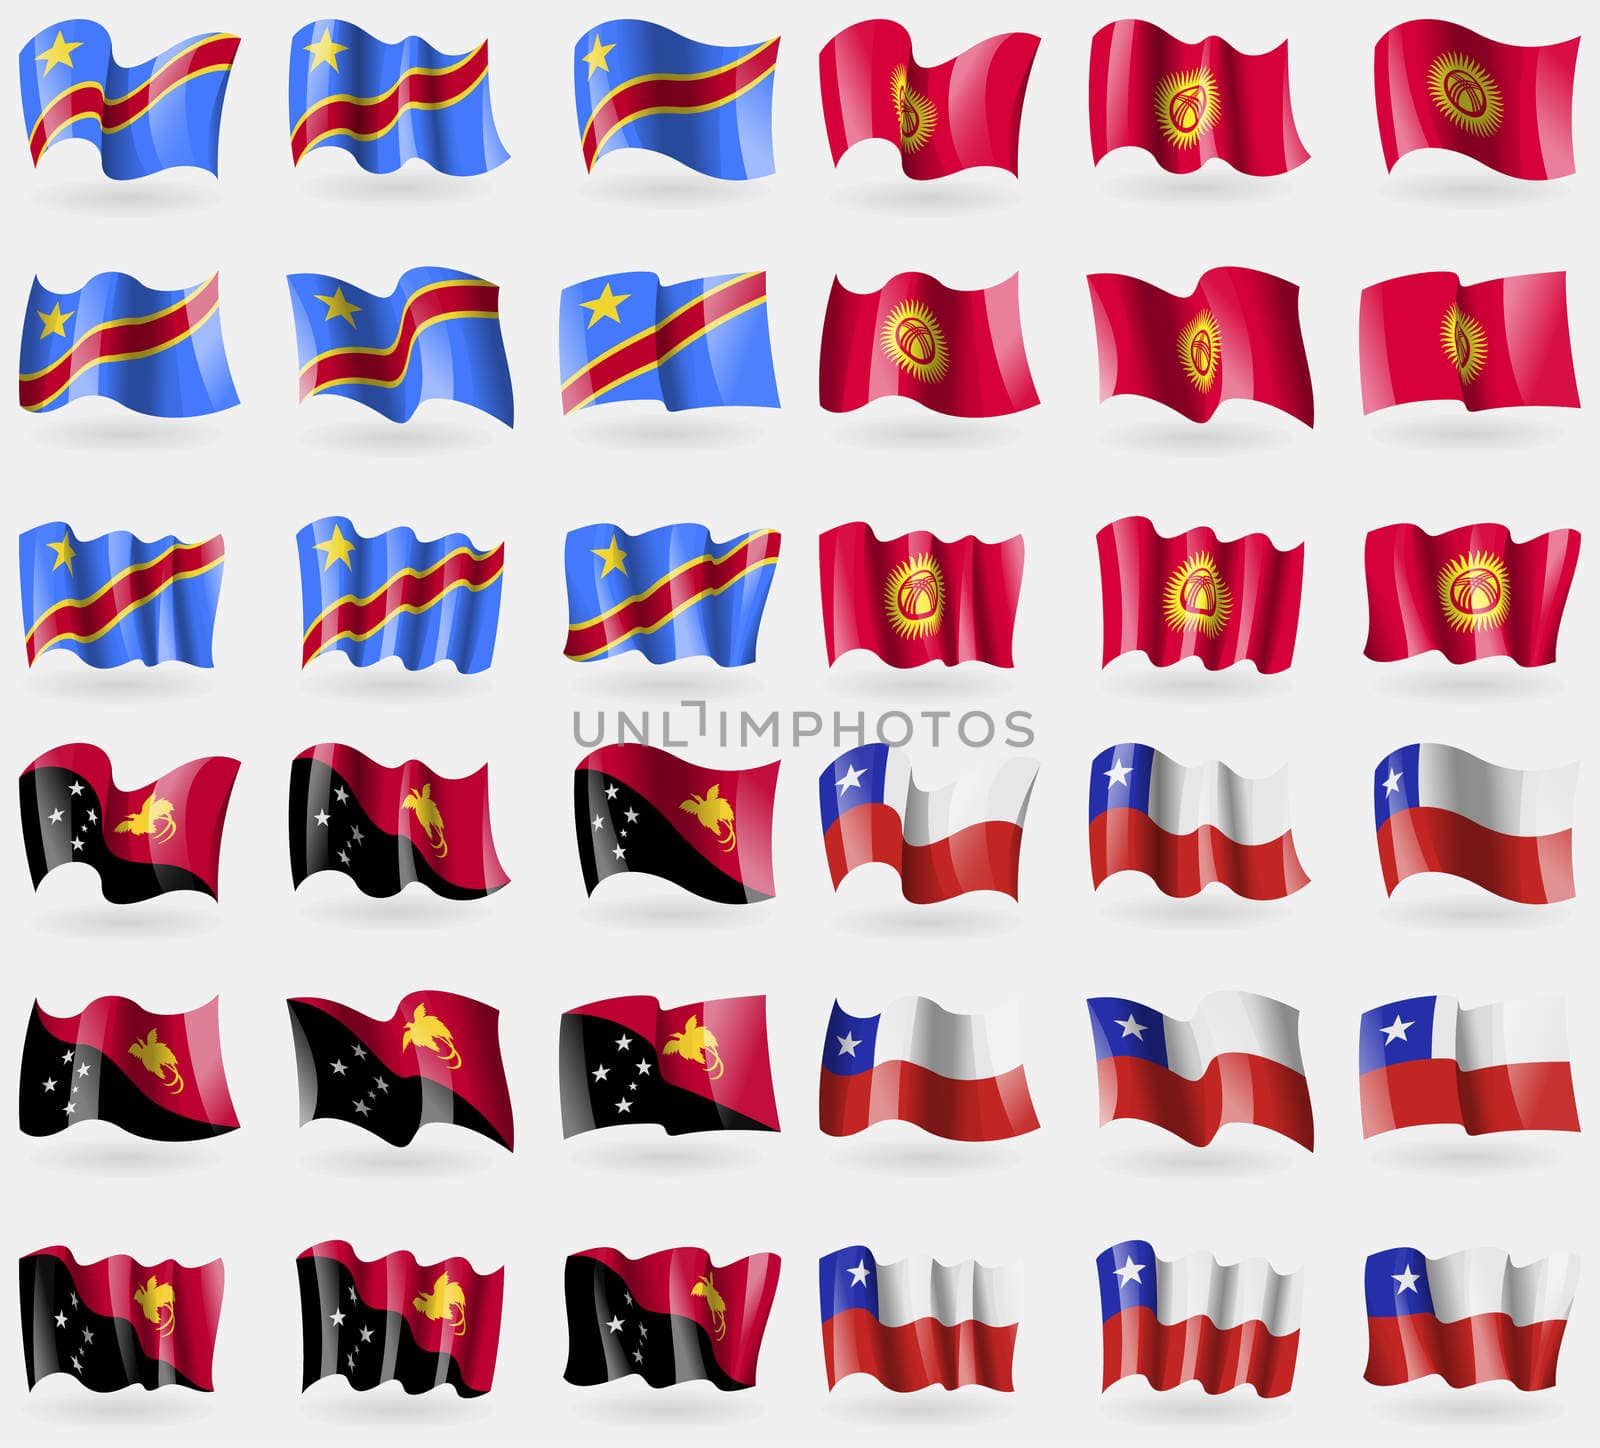 Congo Democratic Republic, Kyrgyzstan, Papua New Guinea, Chile. Set of 36 flags of the countries of the world. illustration